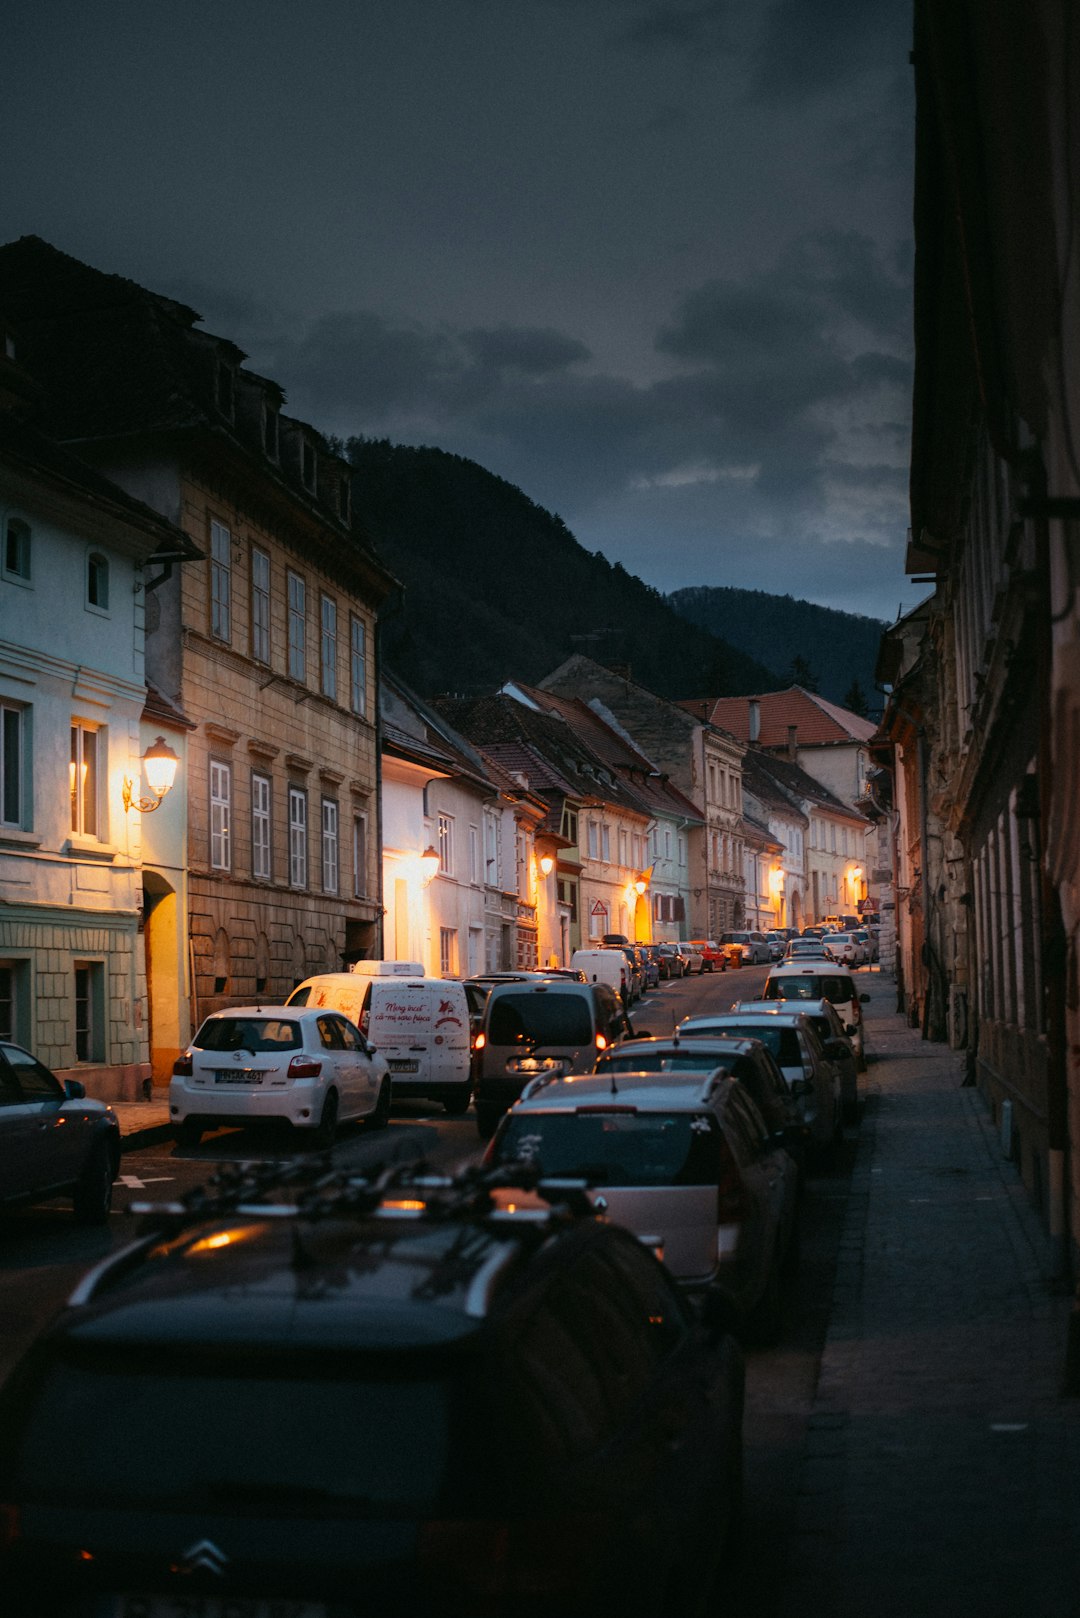 cars parked on side of road near buildings during night time